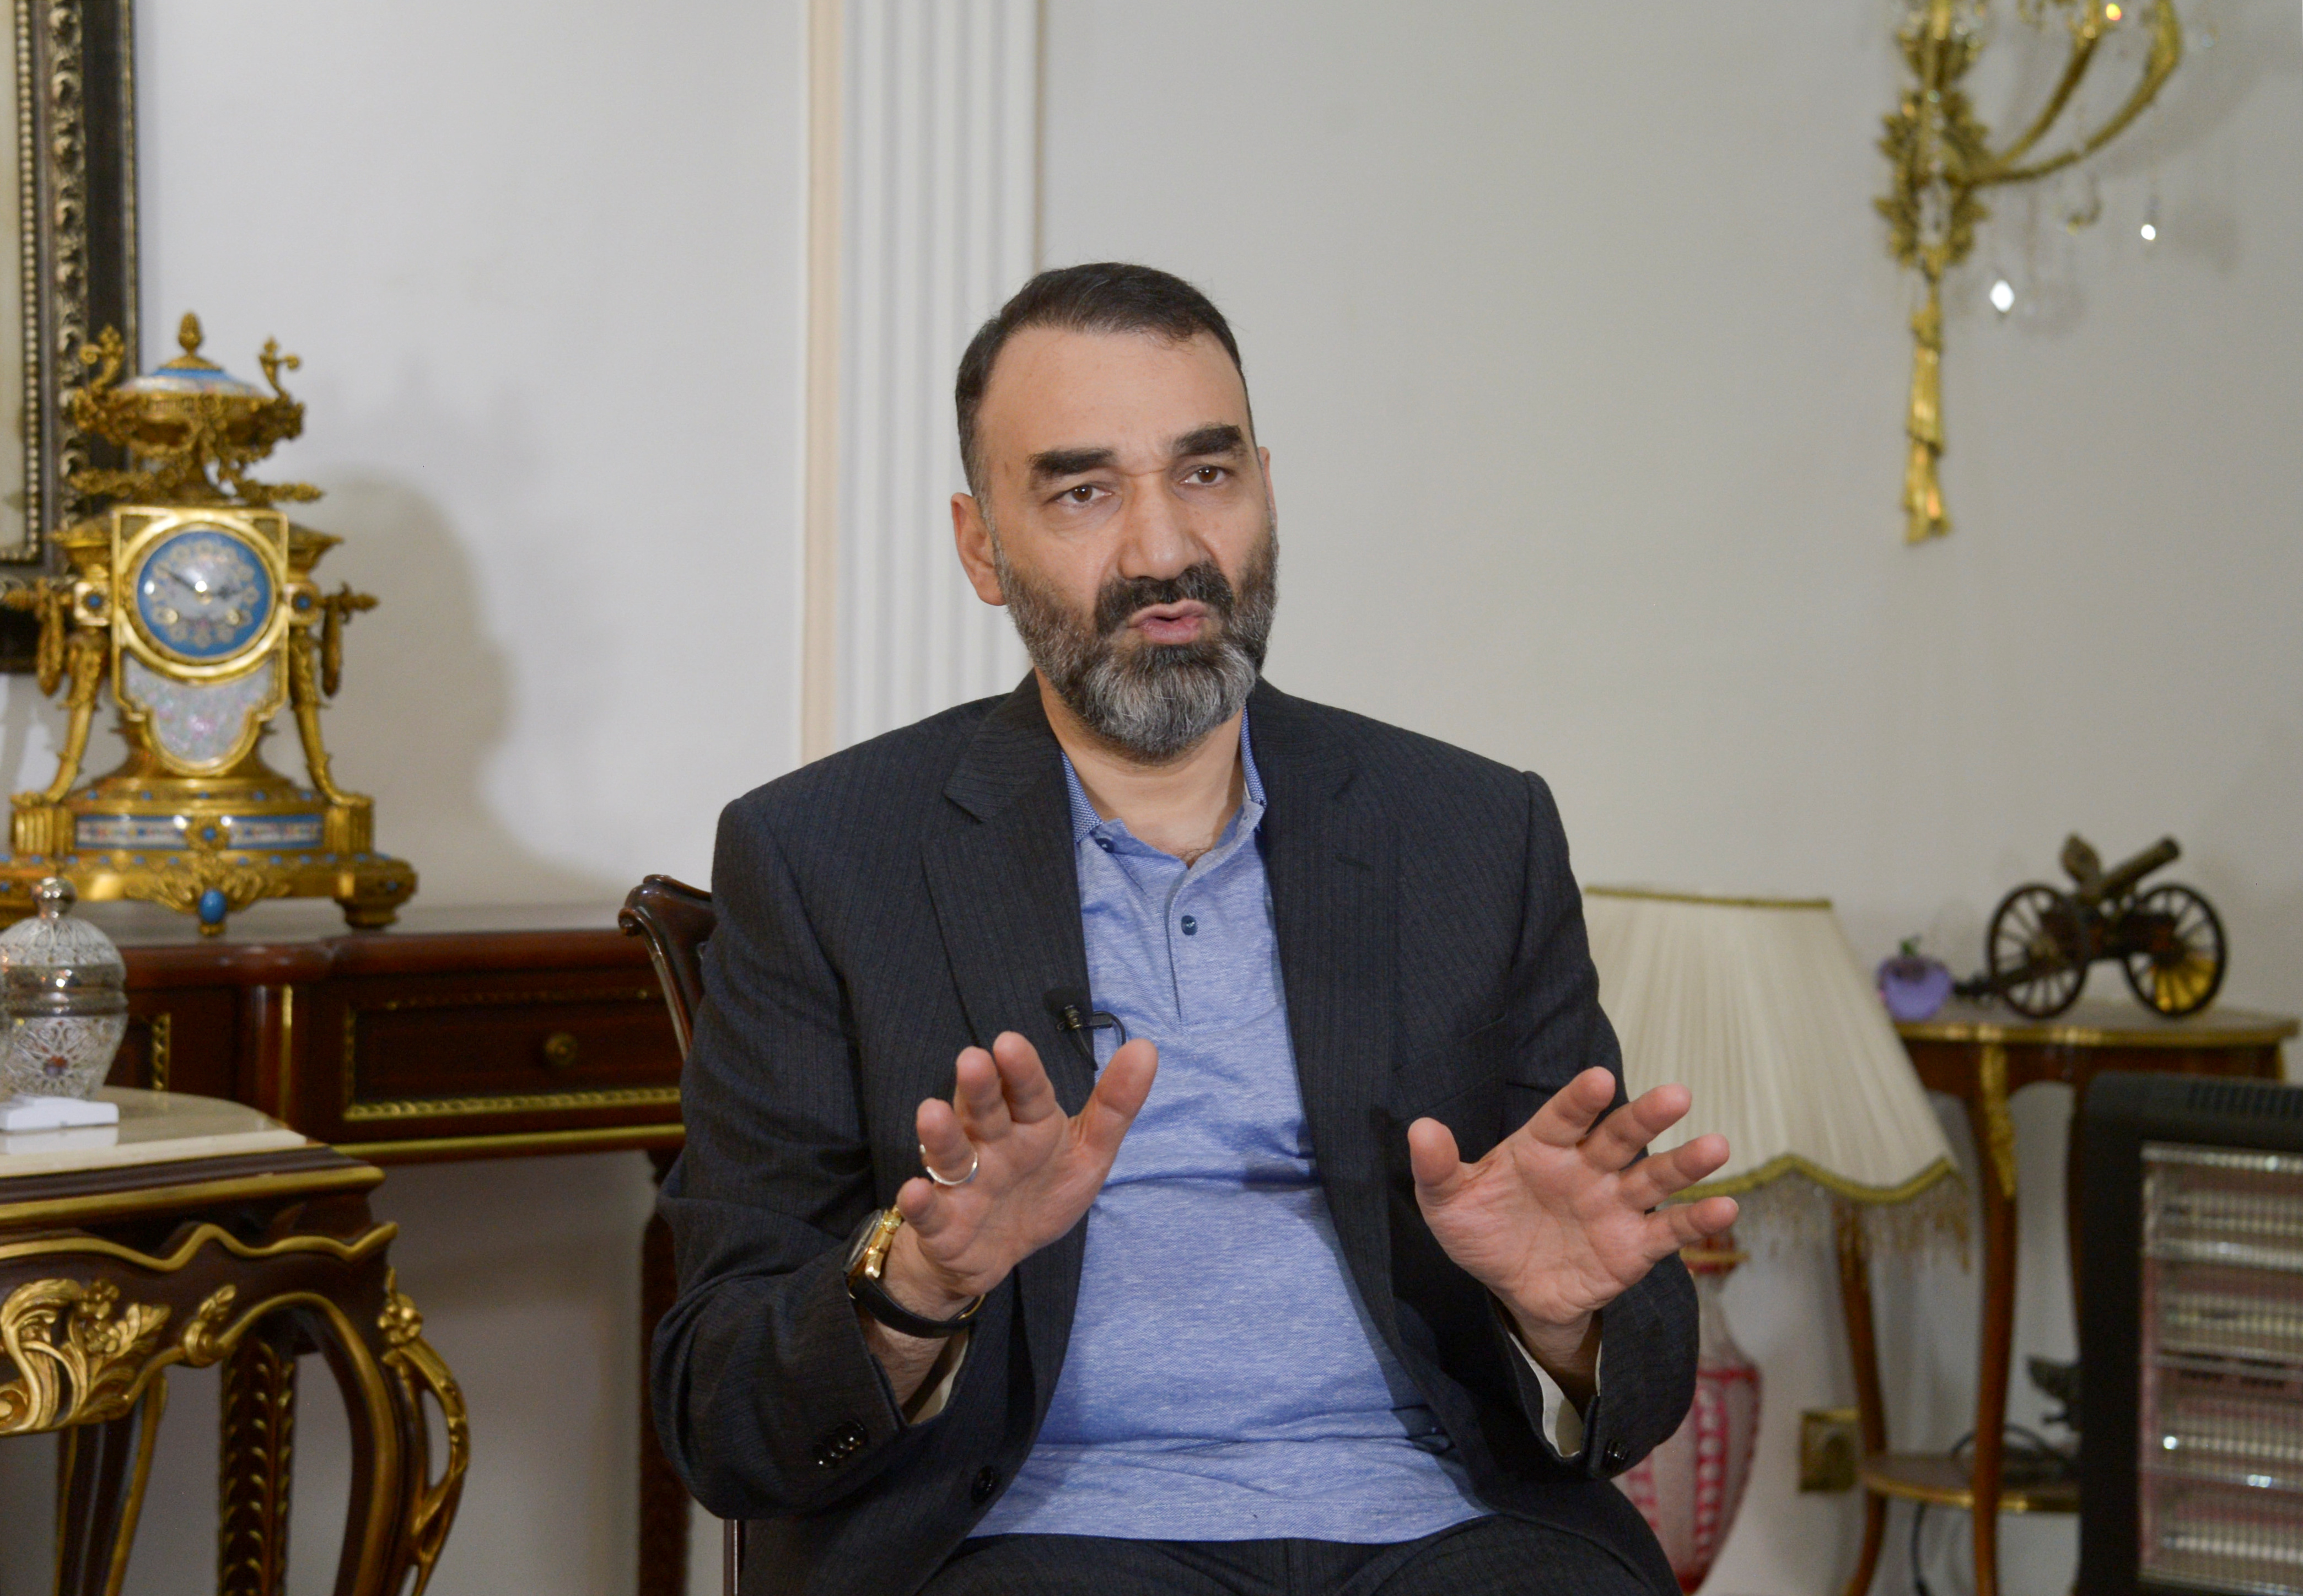 Atta Mohammad Noor, Governor of the Balkh province, speaks during an interview in Mazar-i-Sharif